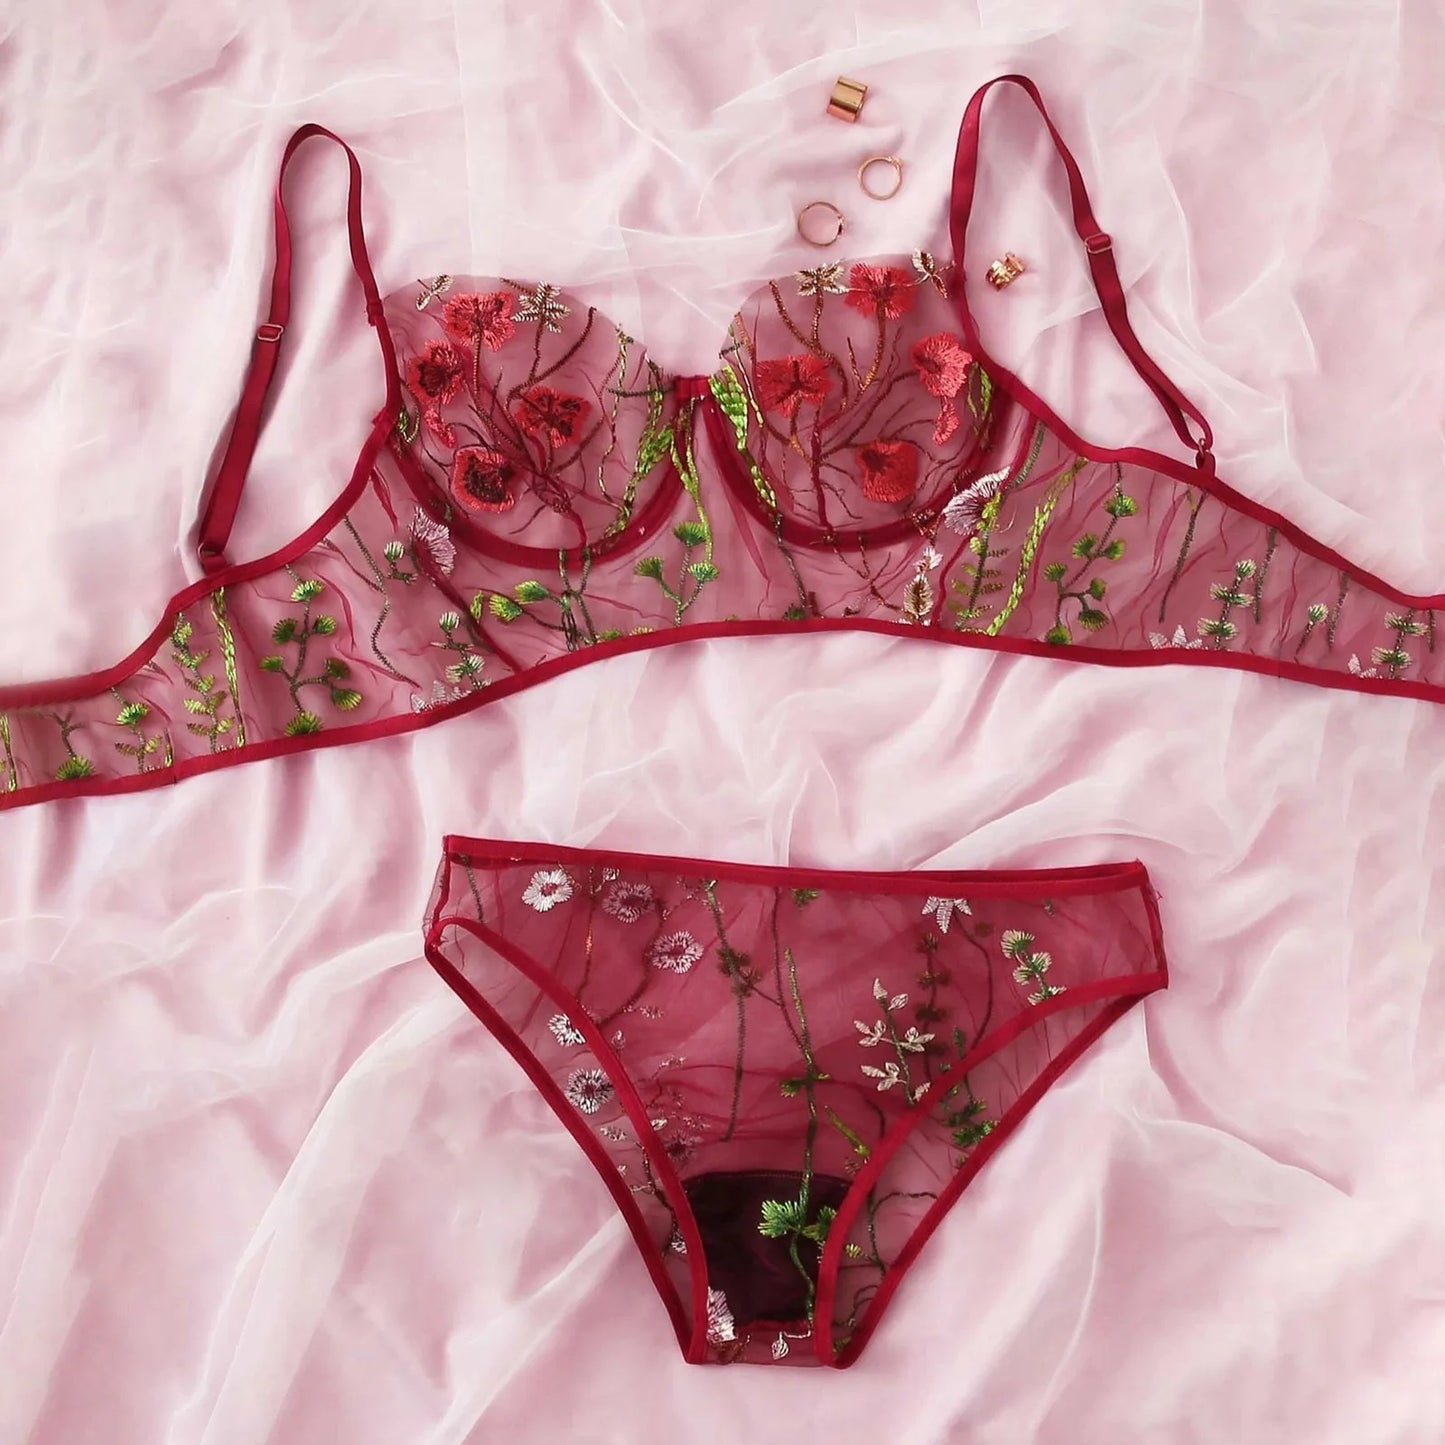 Women's Sexy Lingerie Bra Fashion  Flower Lace Red Pajamas